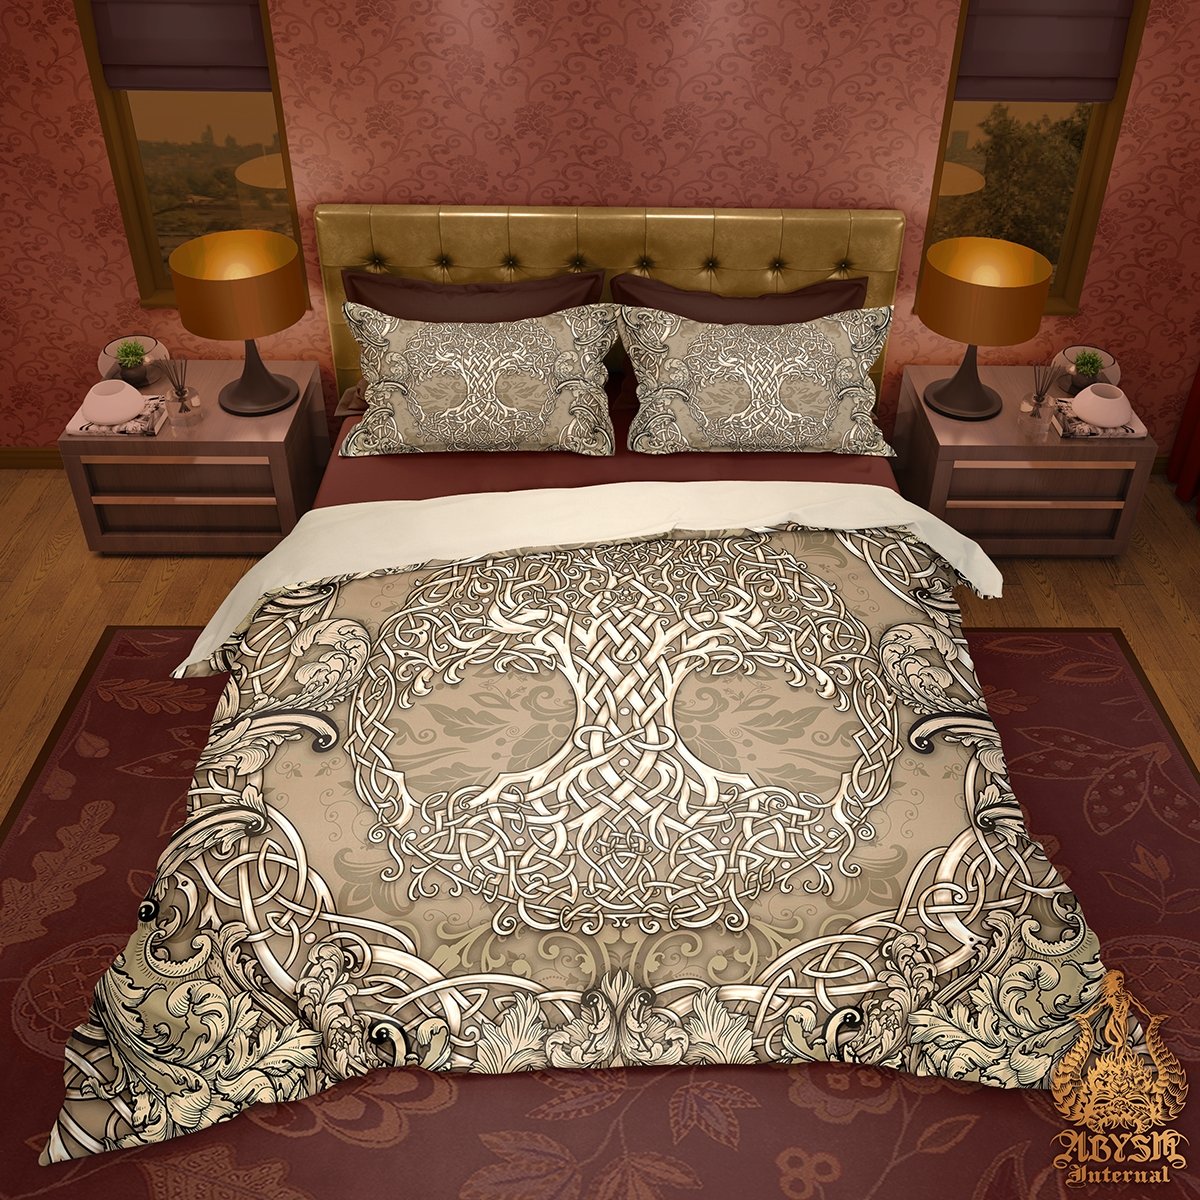 Celtic Bedding Set, Comforter and Duvet, Indie Bed Cover, Wiccan Bedroom Decor King, Queen and Twin Size - Celtic, Tree of Life, Cream - Abysm Internal